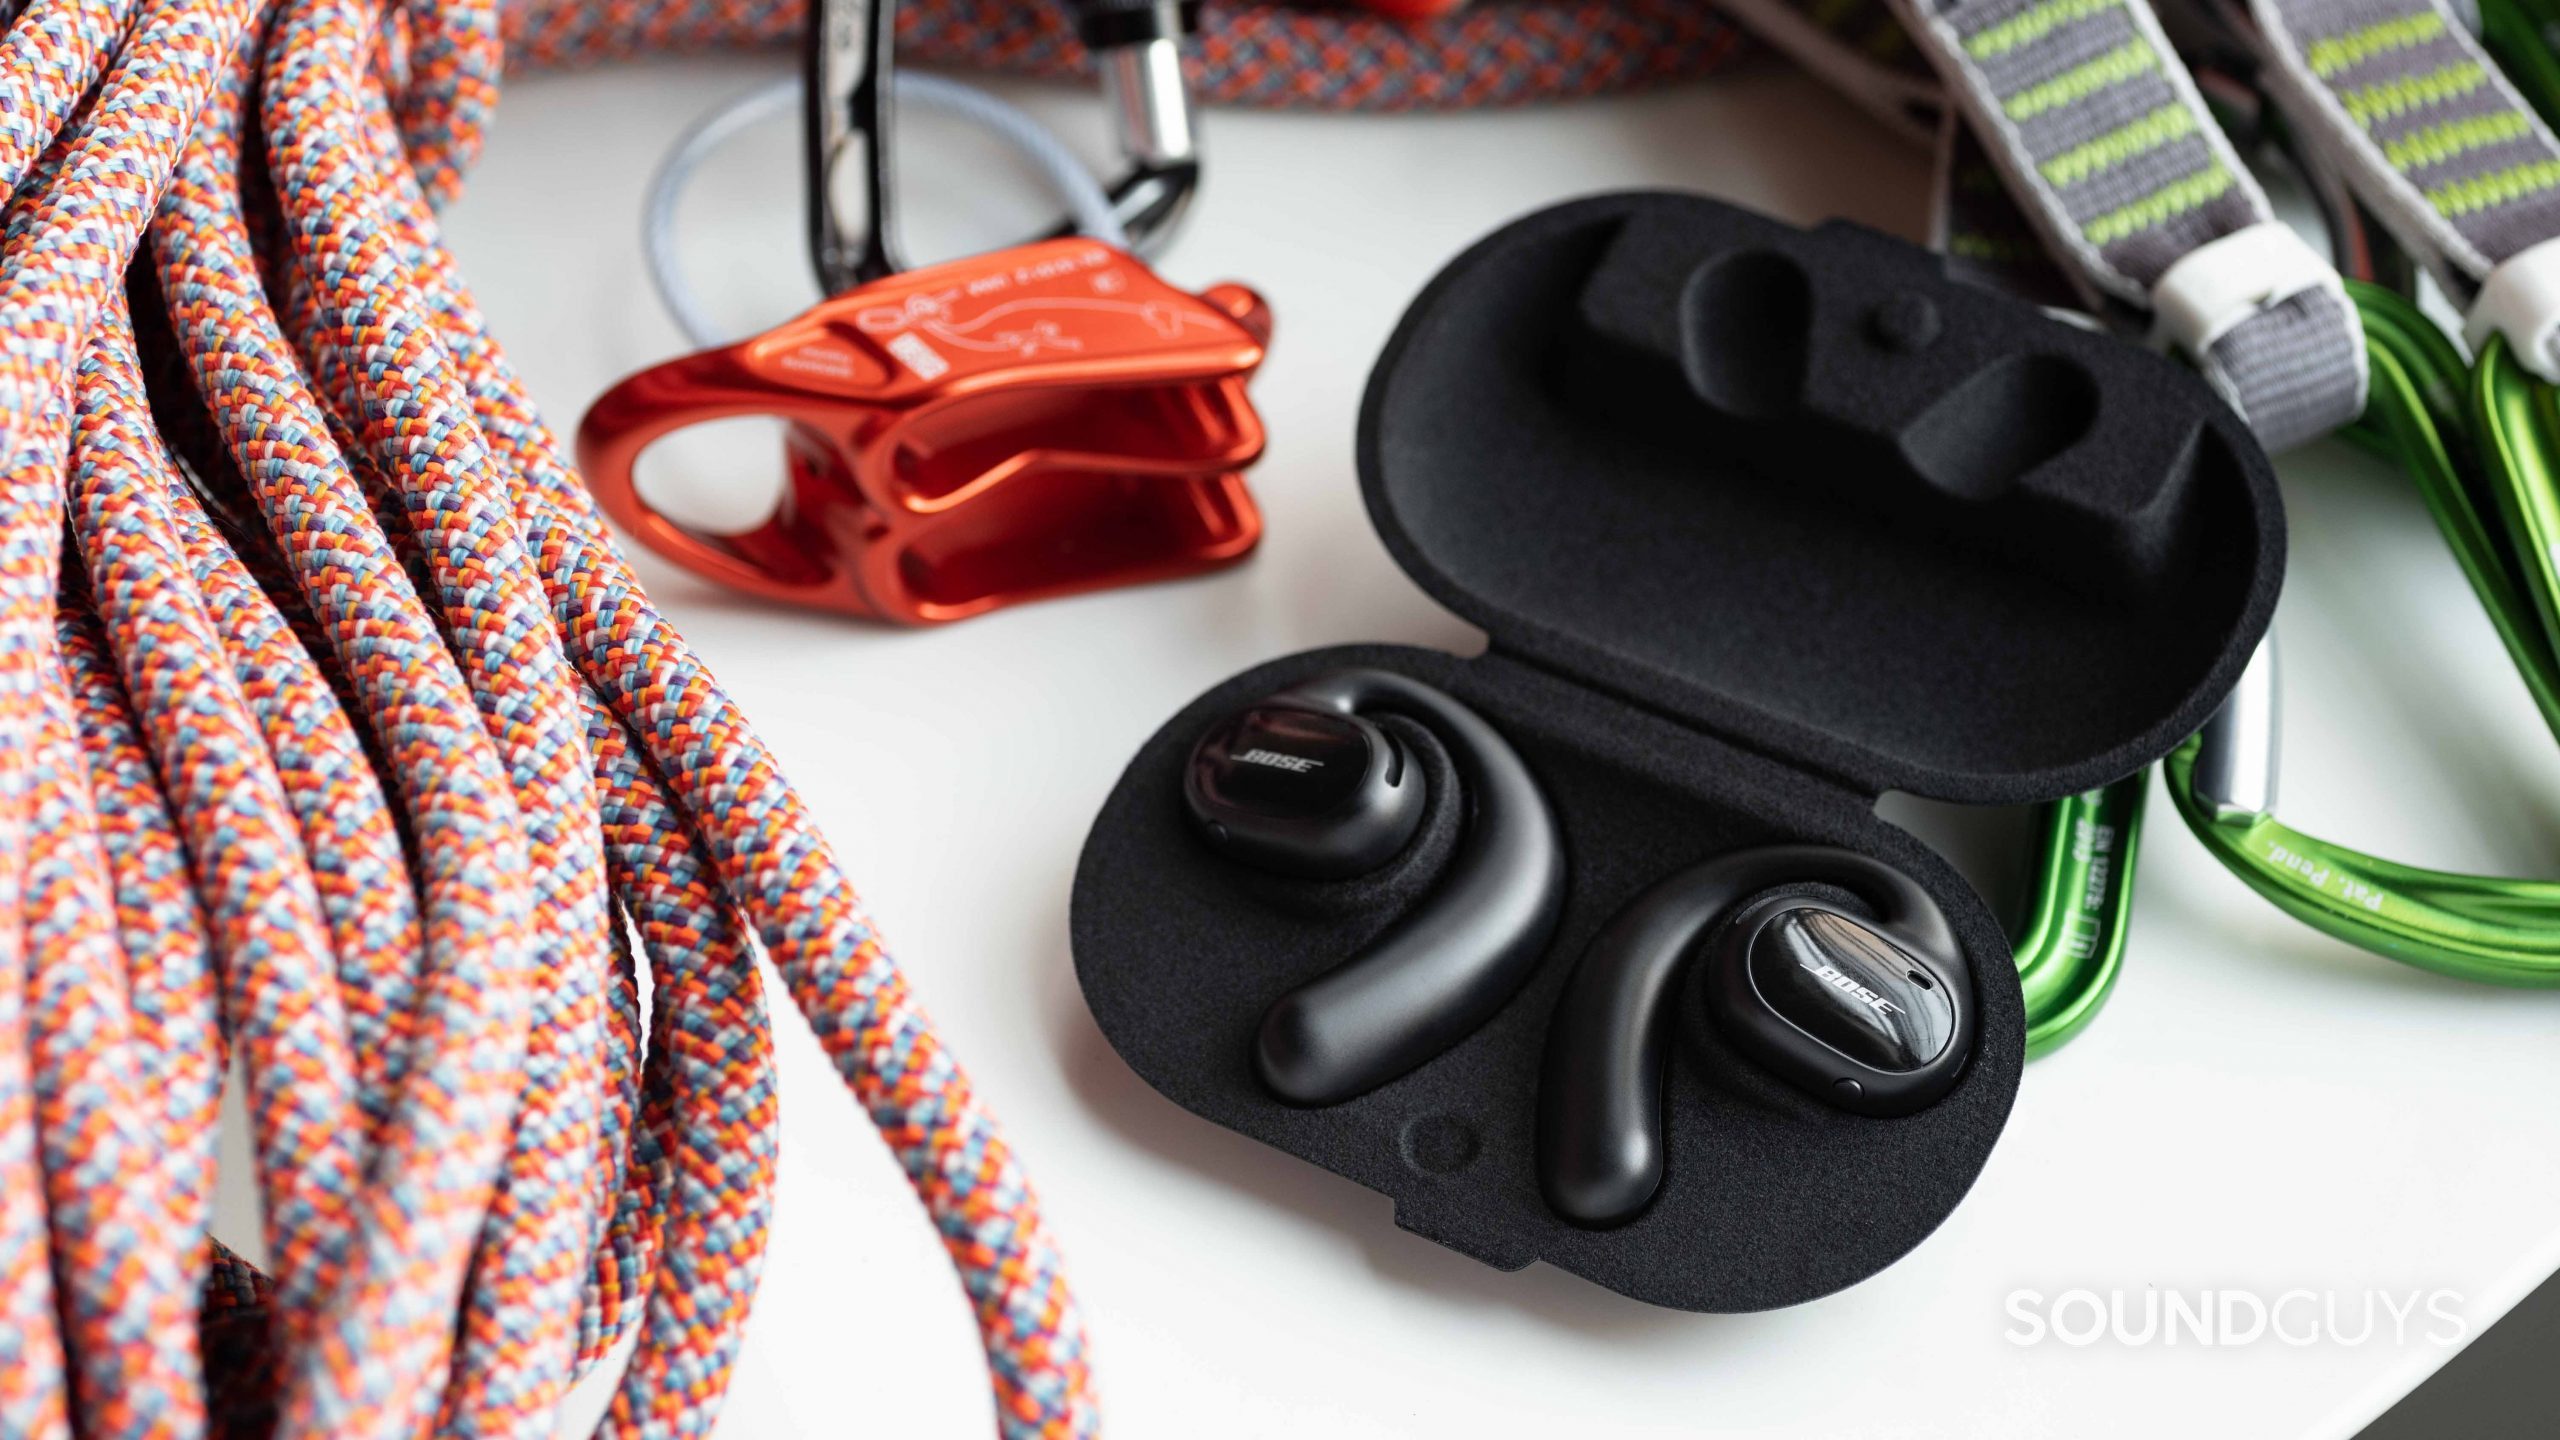 The Bose Sport Open Earbuds in the open carrying case next to a climbing rope and belay device.